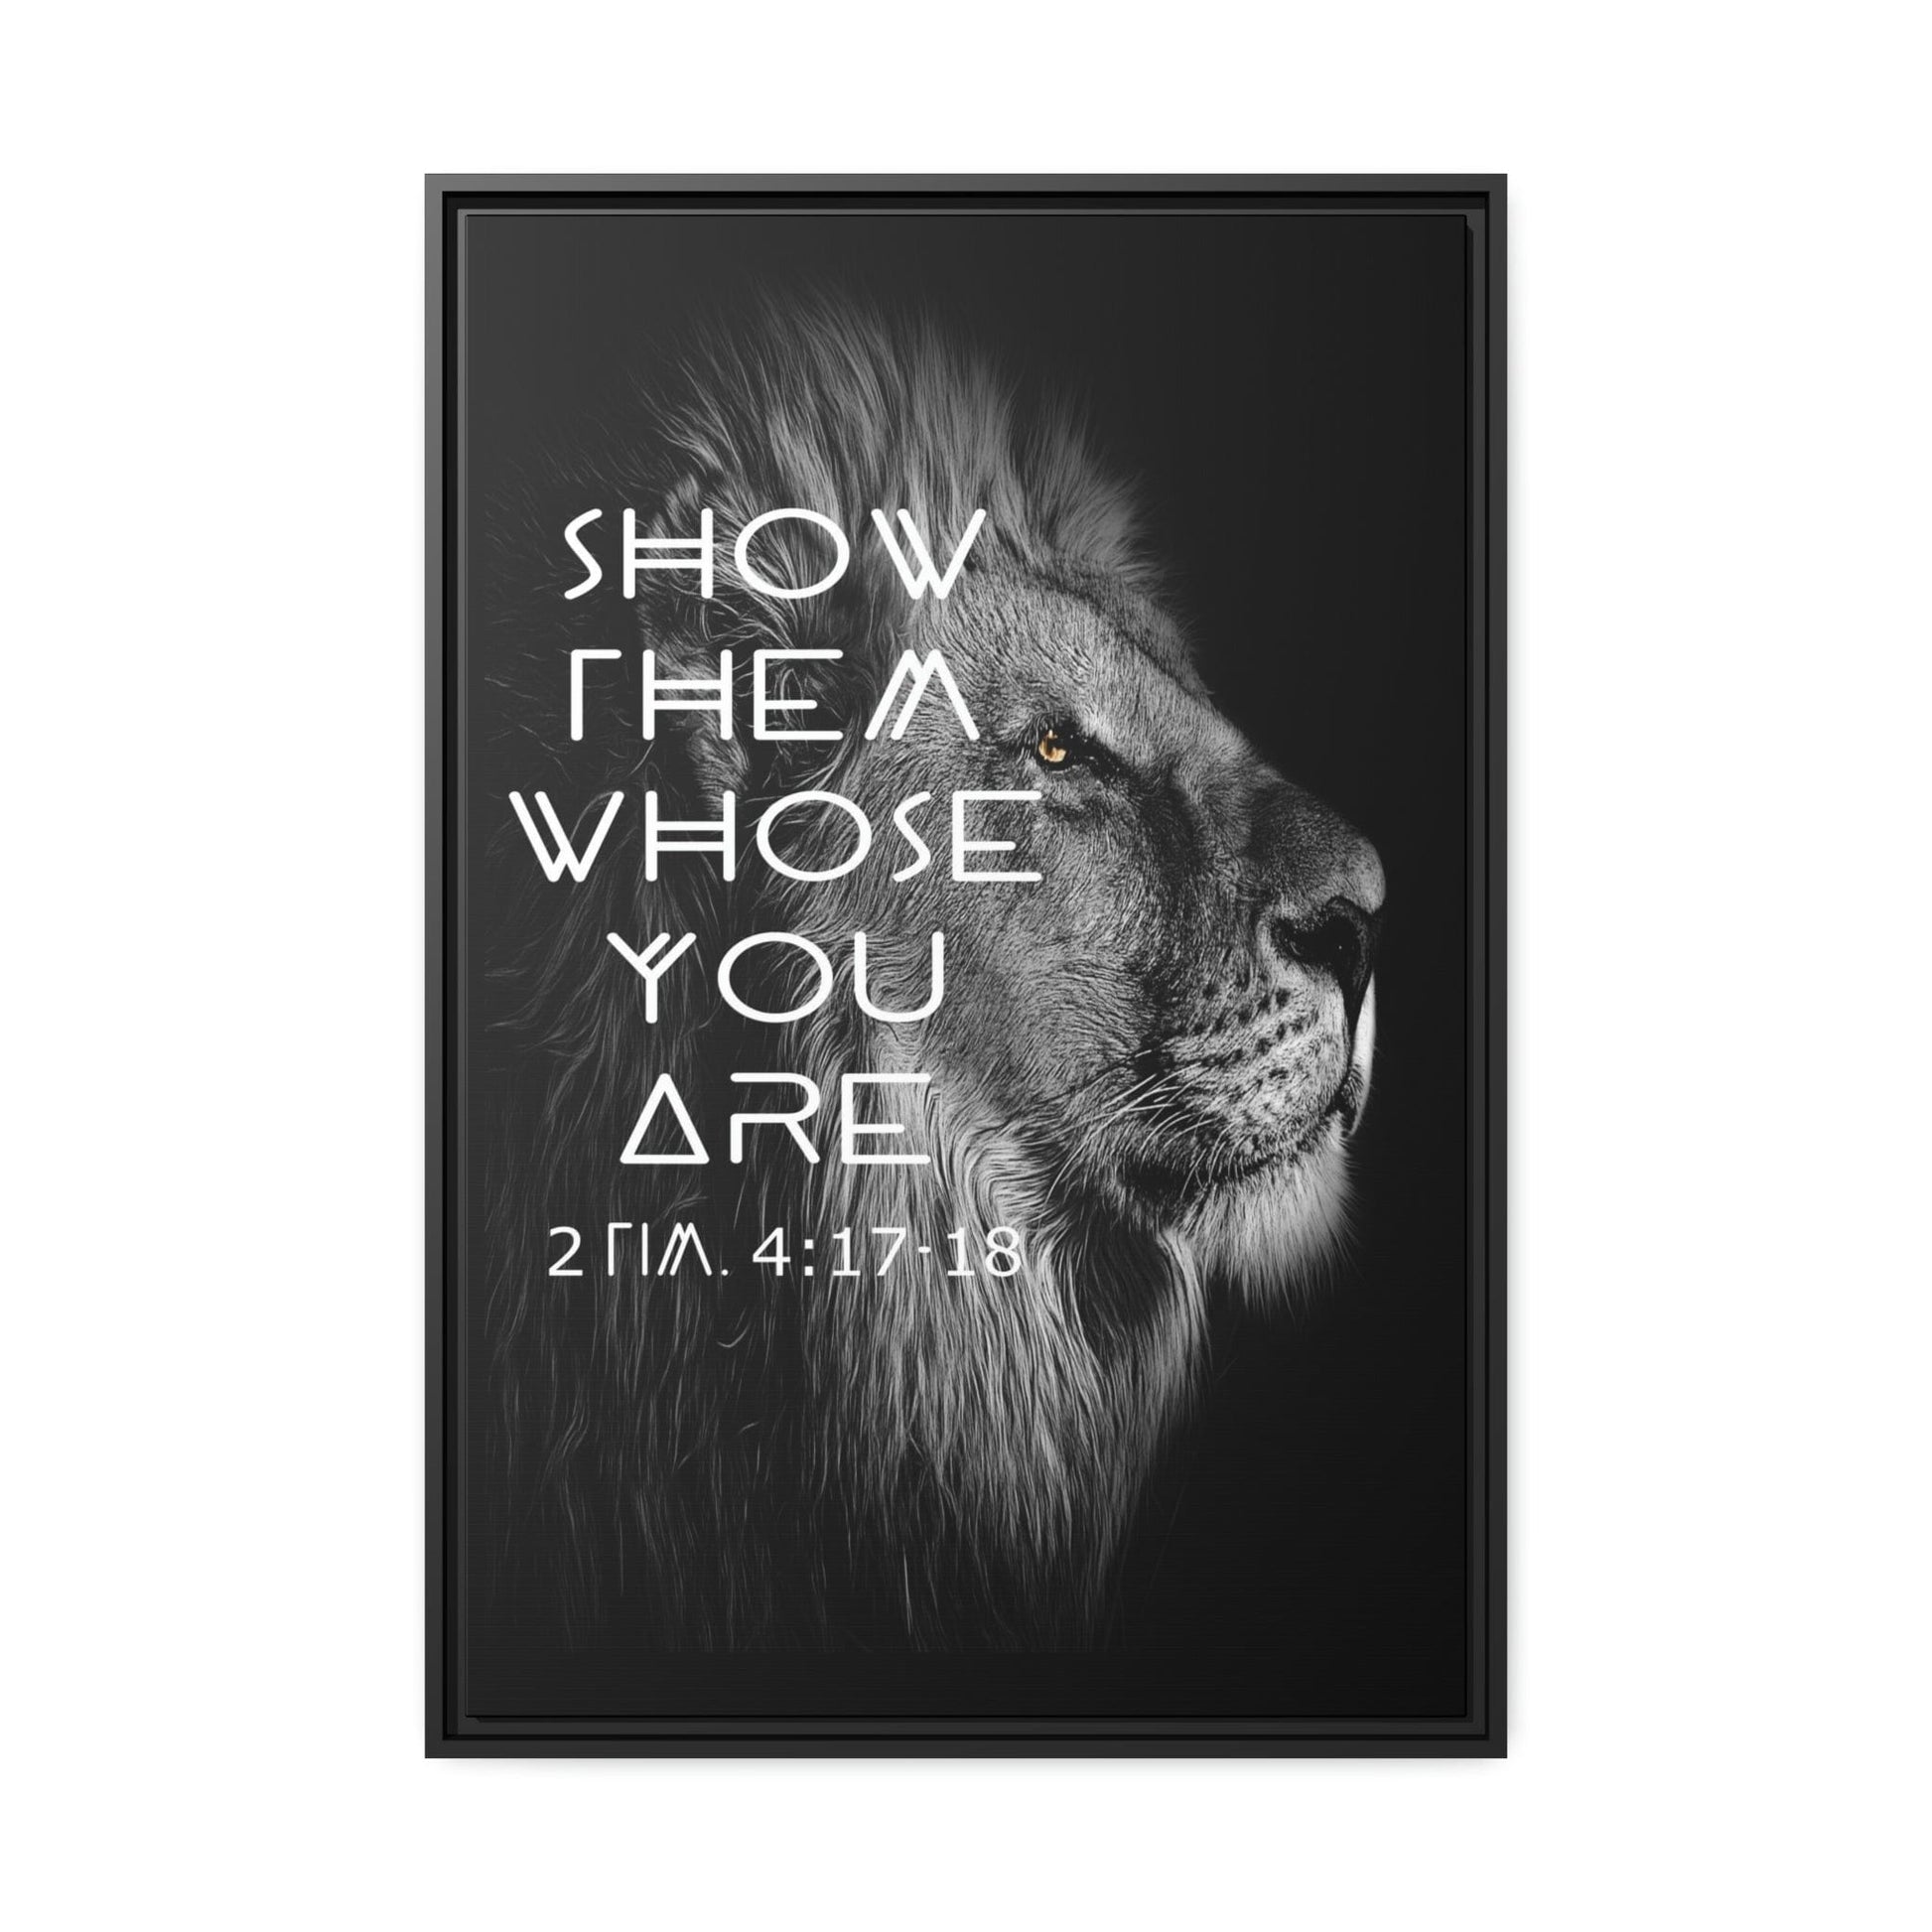 Printify Canvas 24″ x 36″ (Vertical) / Black / 1.25" Show Them Whose You Are - 2 Tim 4:17-18 Christian Canvas Wall Art